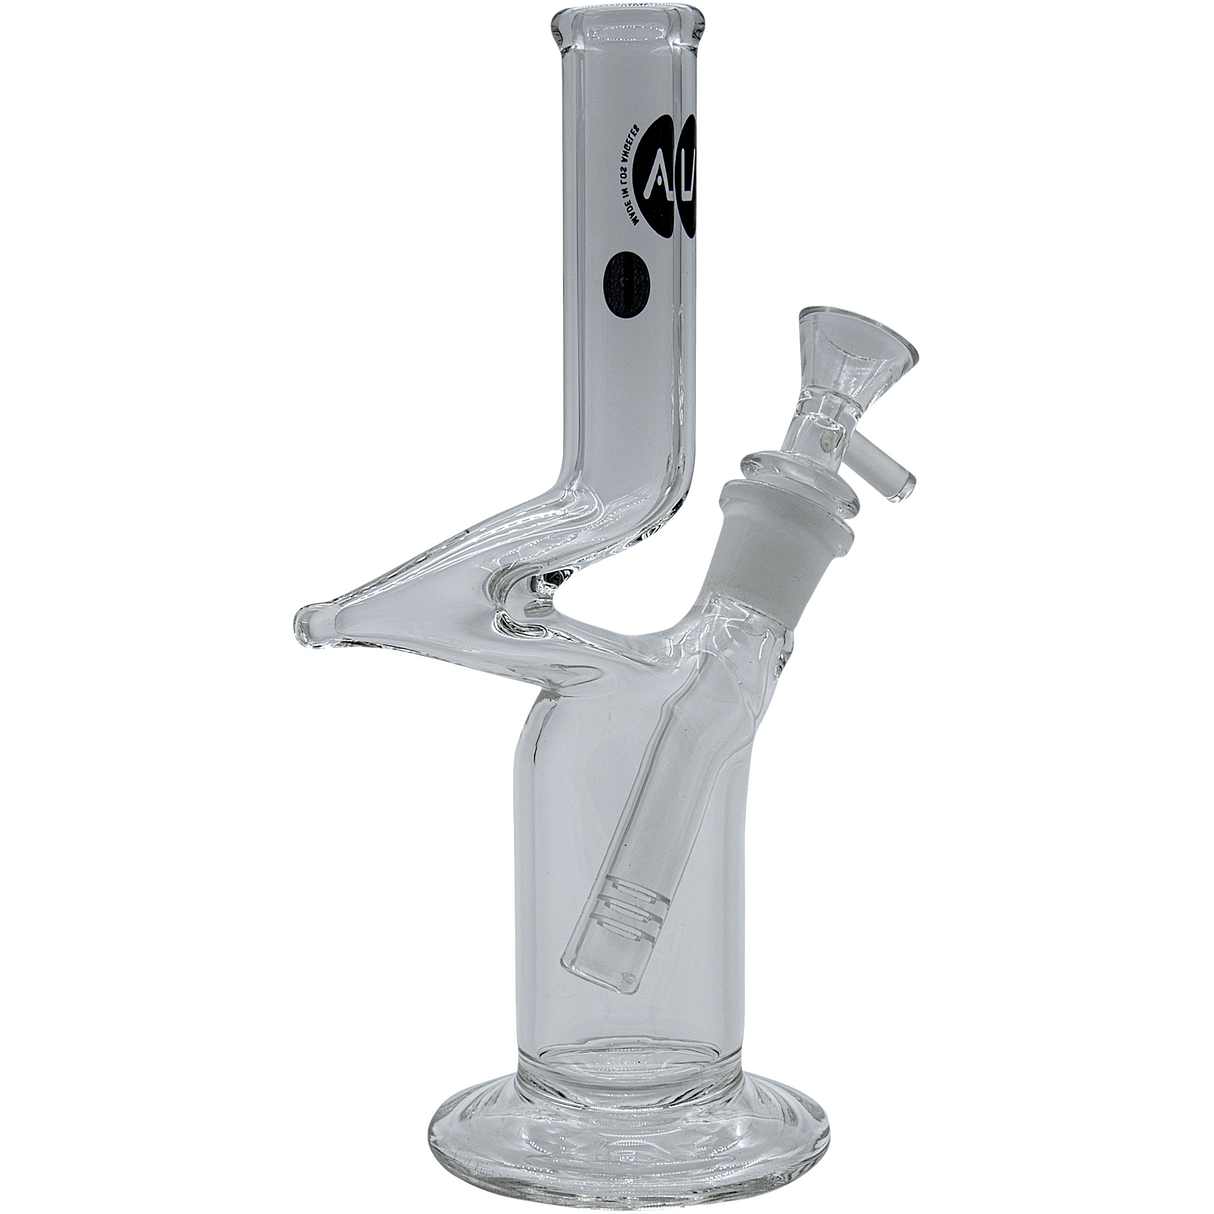 LA Pipes "The Zig" Straight Zong Bong, 8" height, 26mm diameter, Borosilicate Glass, front view